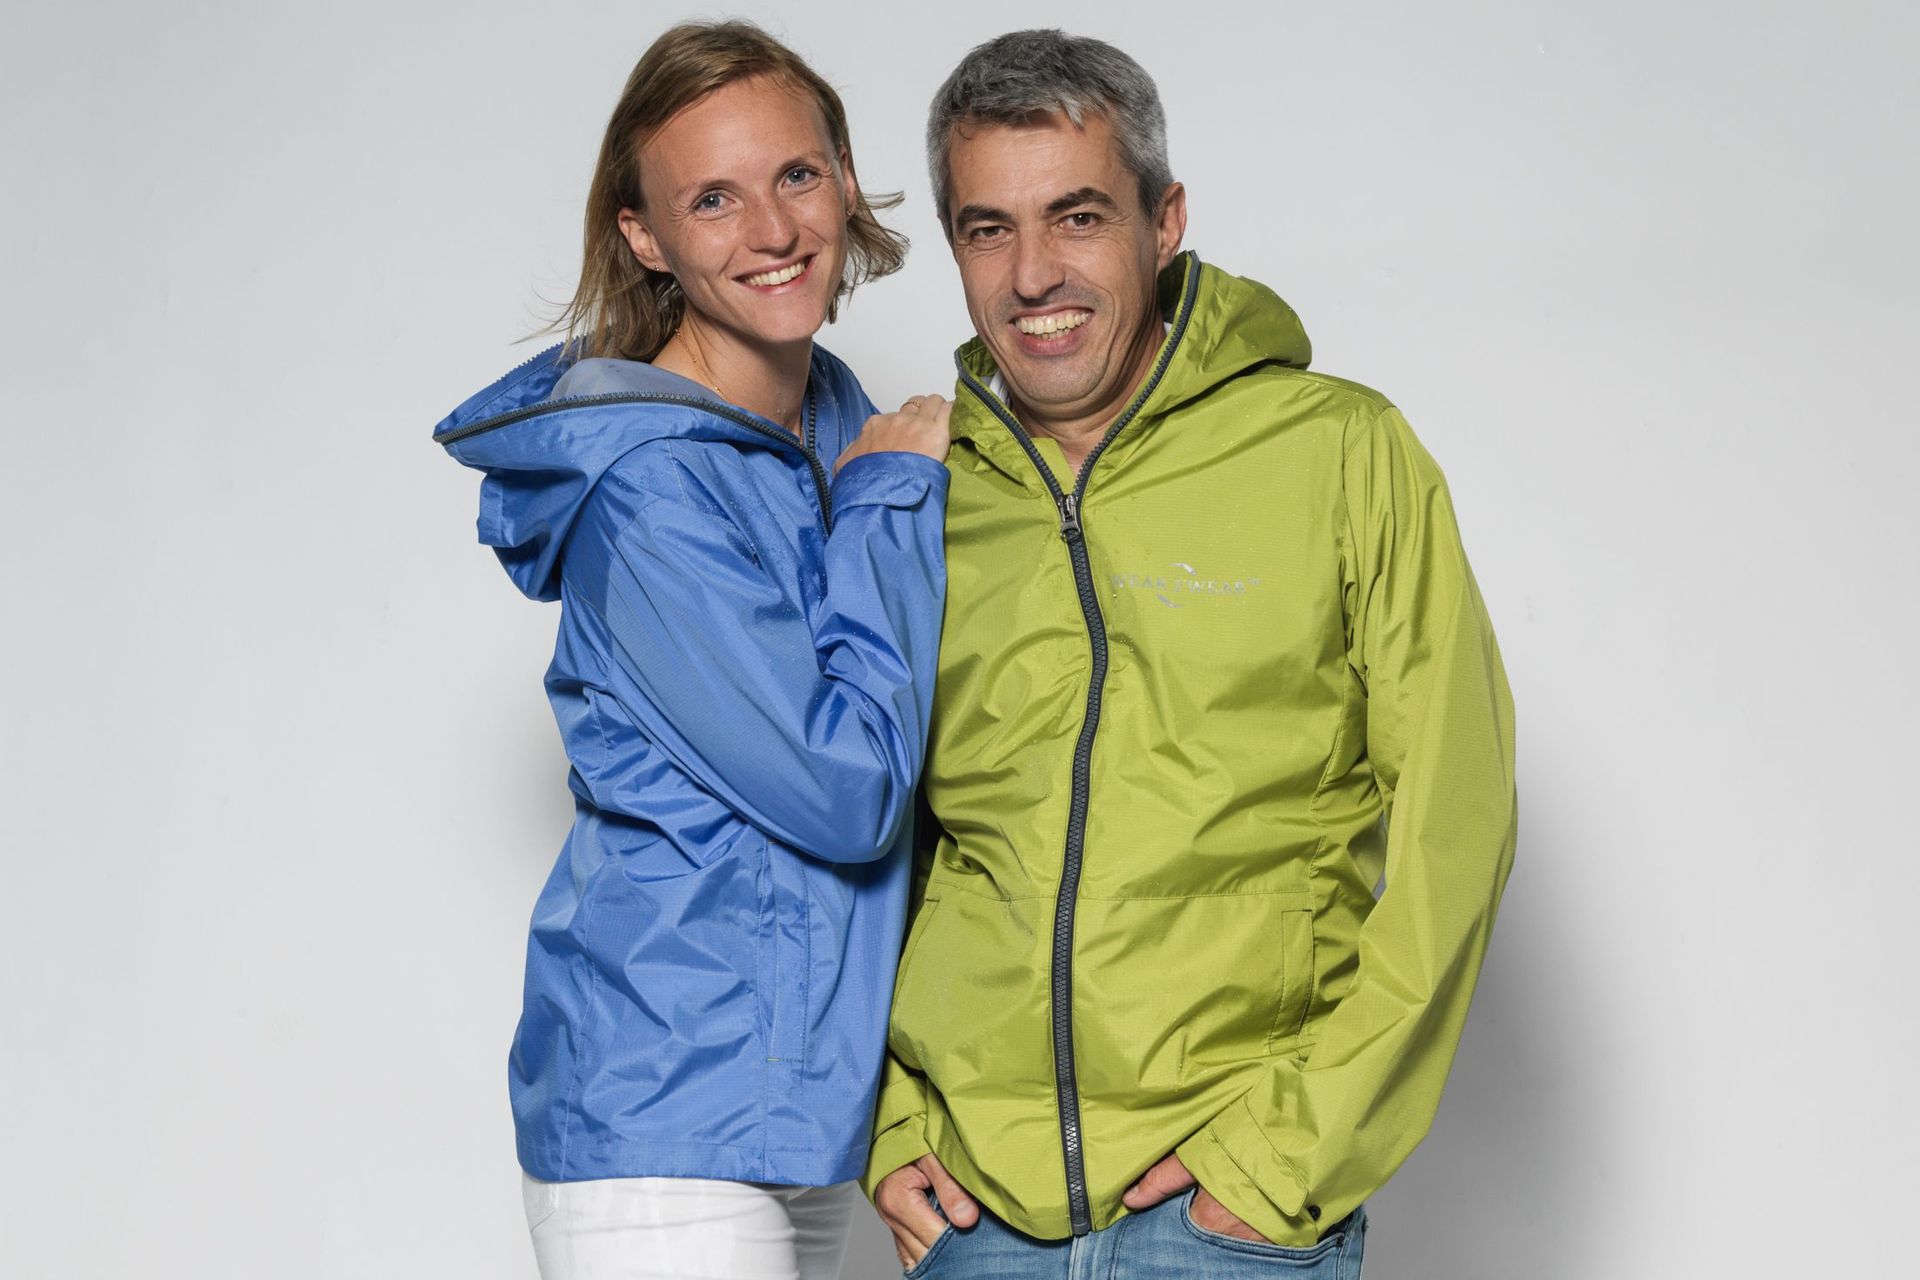 Two variants of the "ecological" Wear2Wear jacket: blue or green? The outer layer of the blue "starter version" of the new jacket contains polyester made from PET bottles; the green color indicates that material from the recycling process has been used (Photo: Schoeller Textil AG)